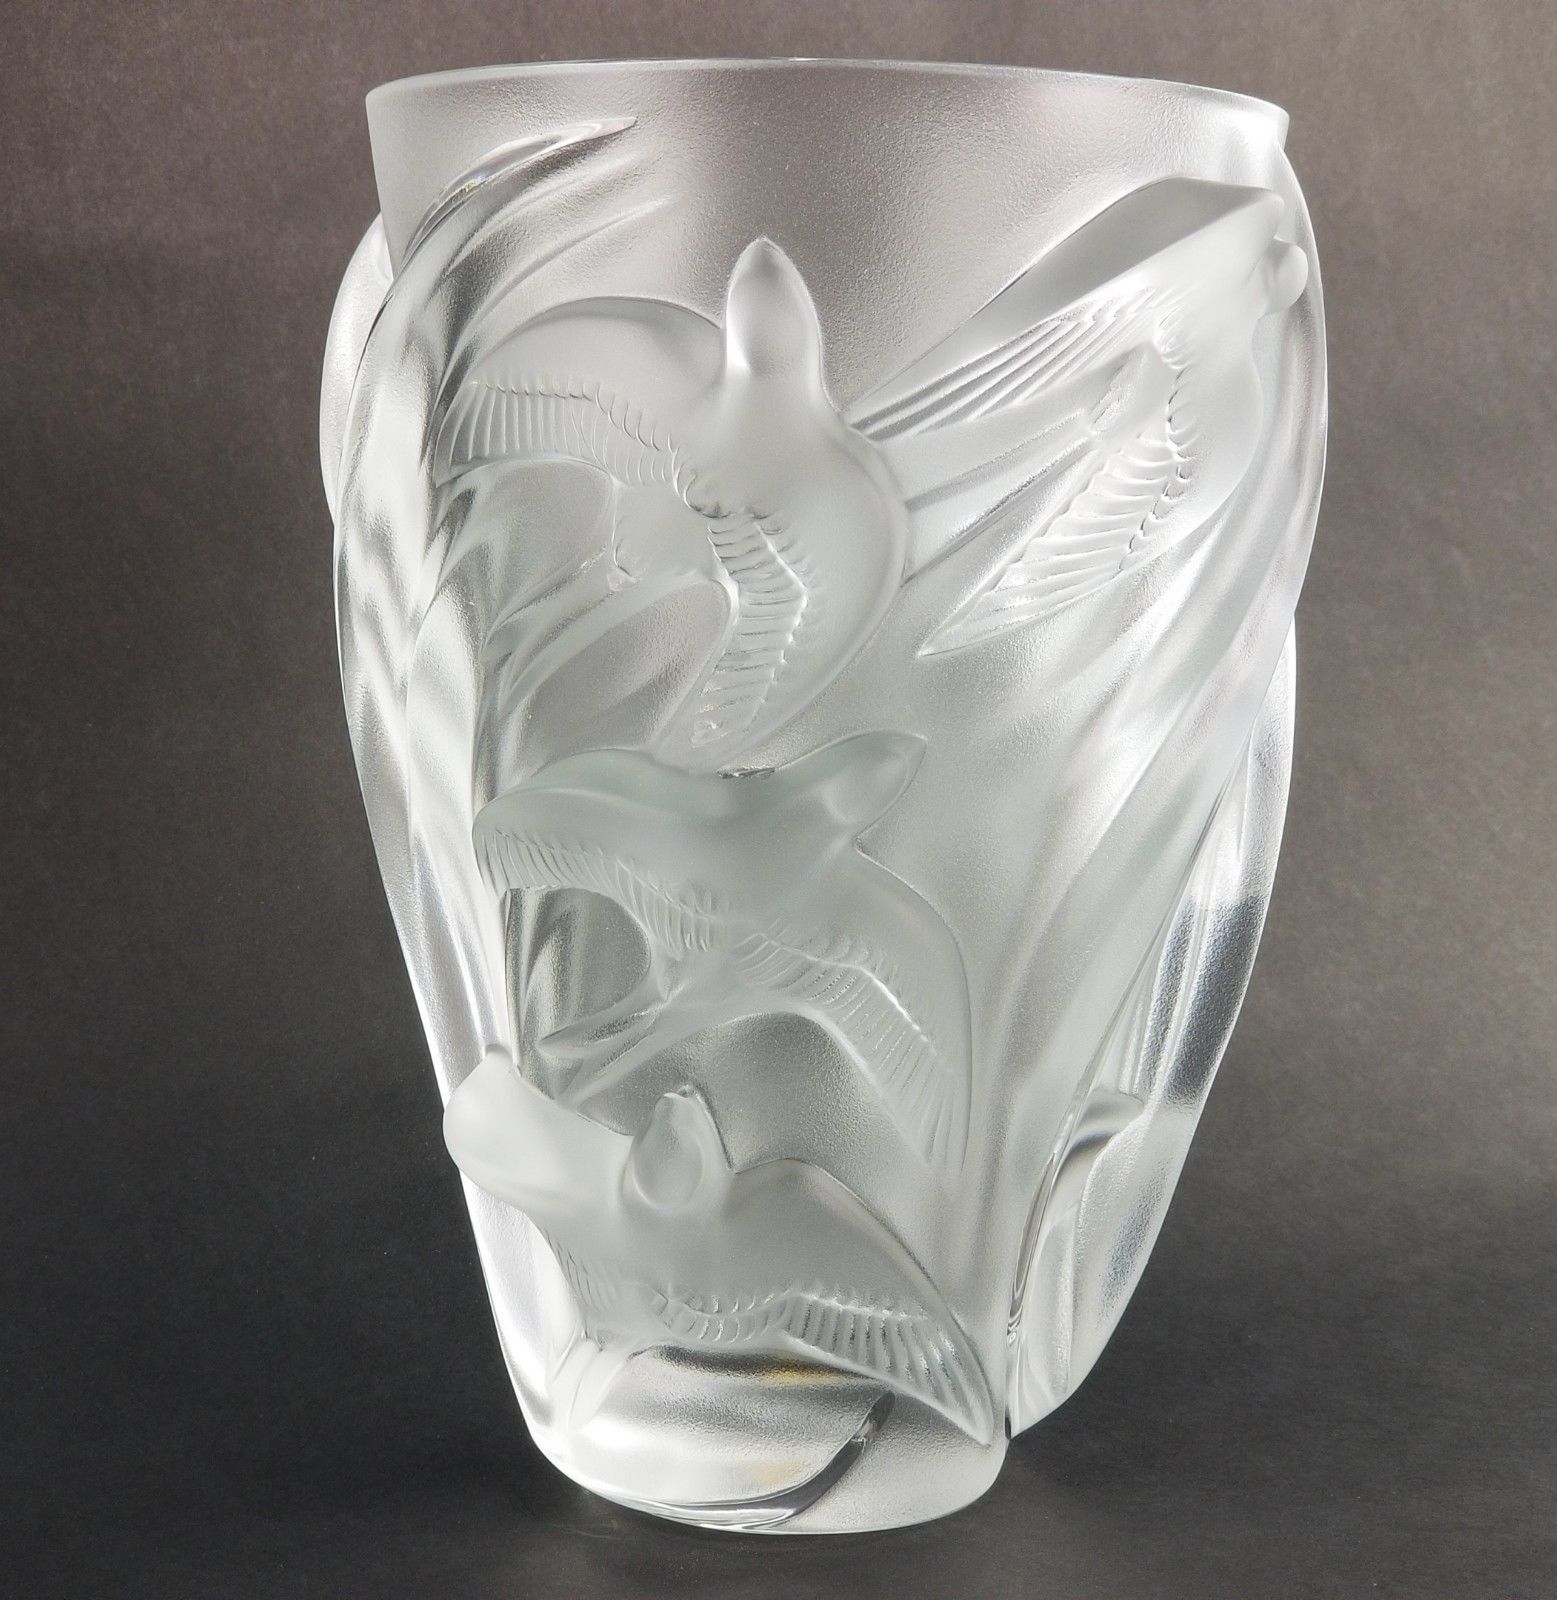 Sold at Auction: 6 FROSTED BIRD WINE GLASSES STYLE OF LALIQUE